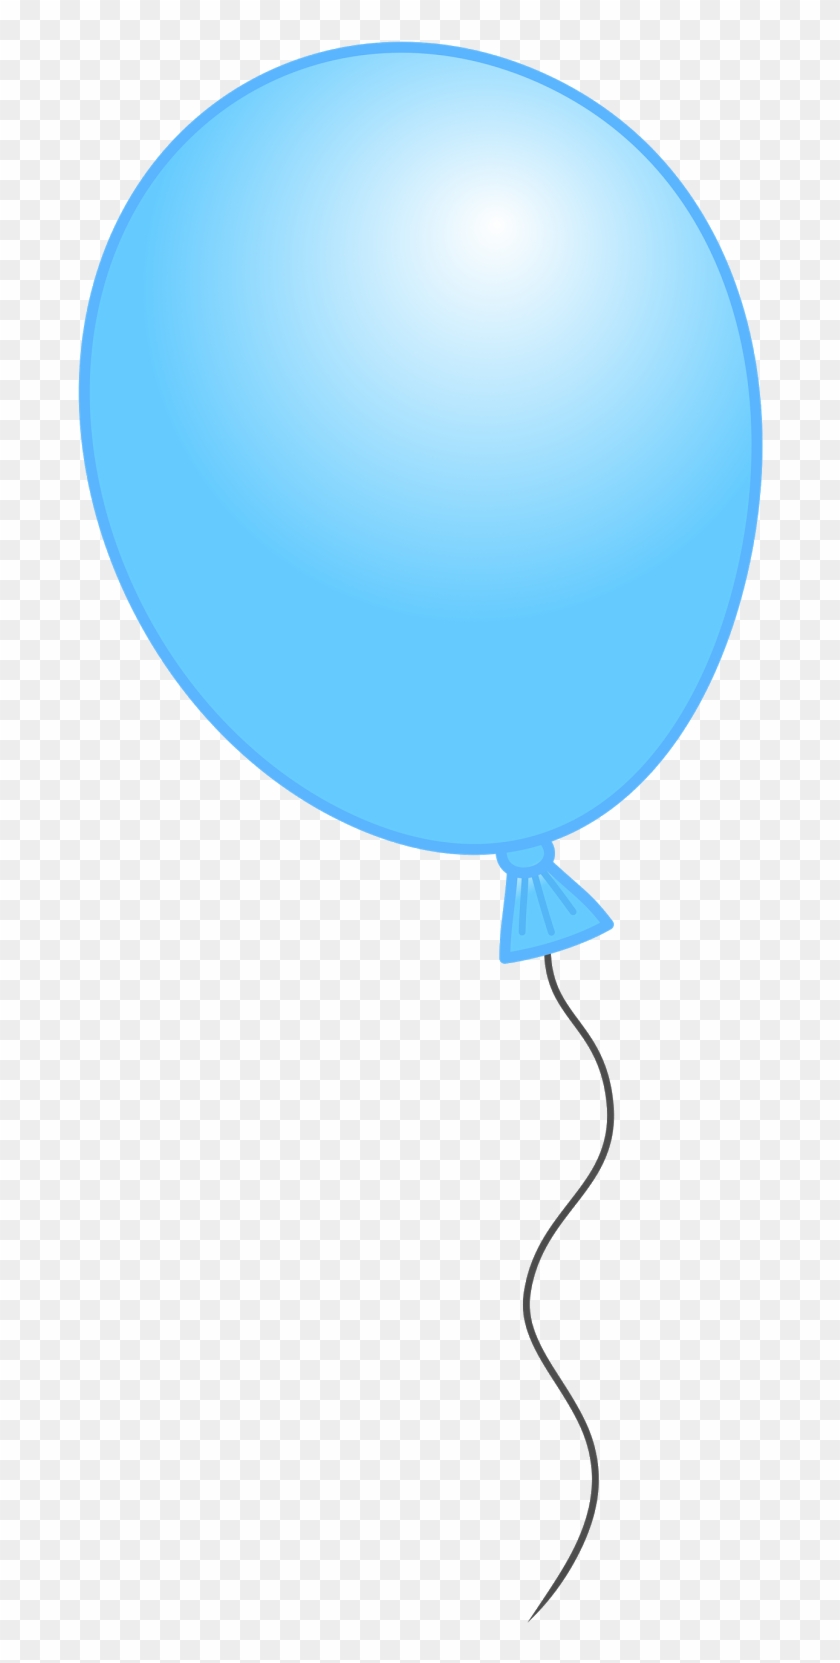 Light Blue Clipart Balloon Pencil And In Color Light - Light Blue Balloon Clipart #292898